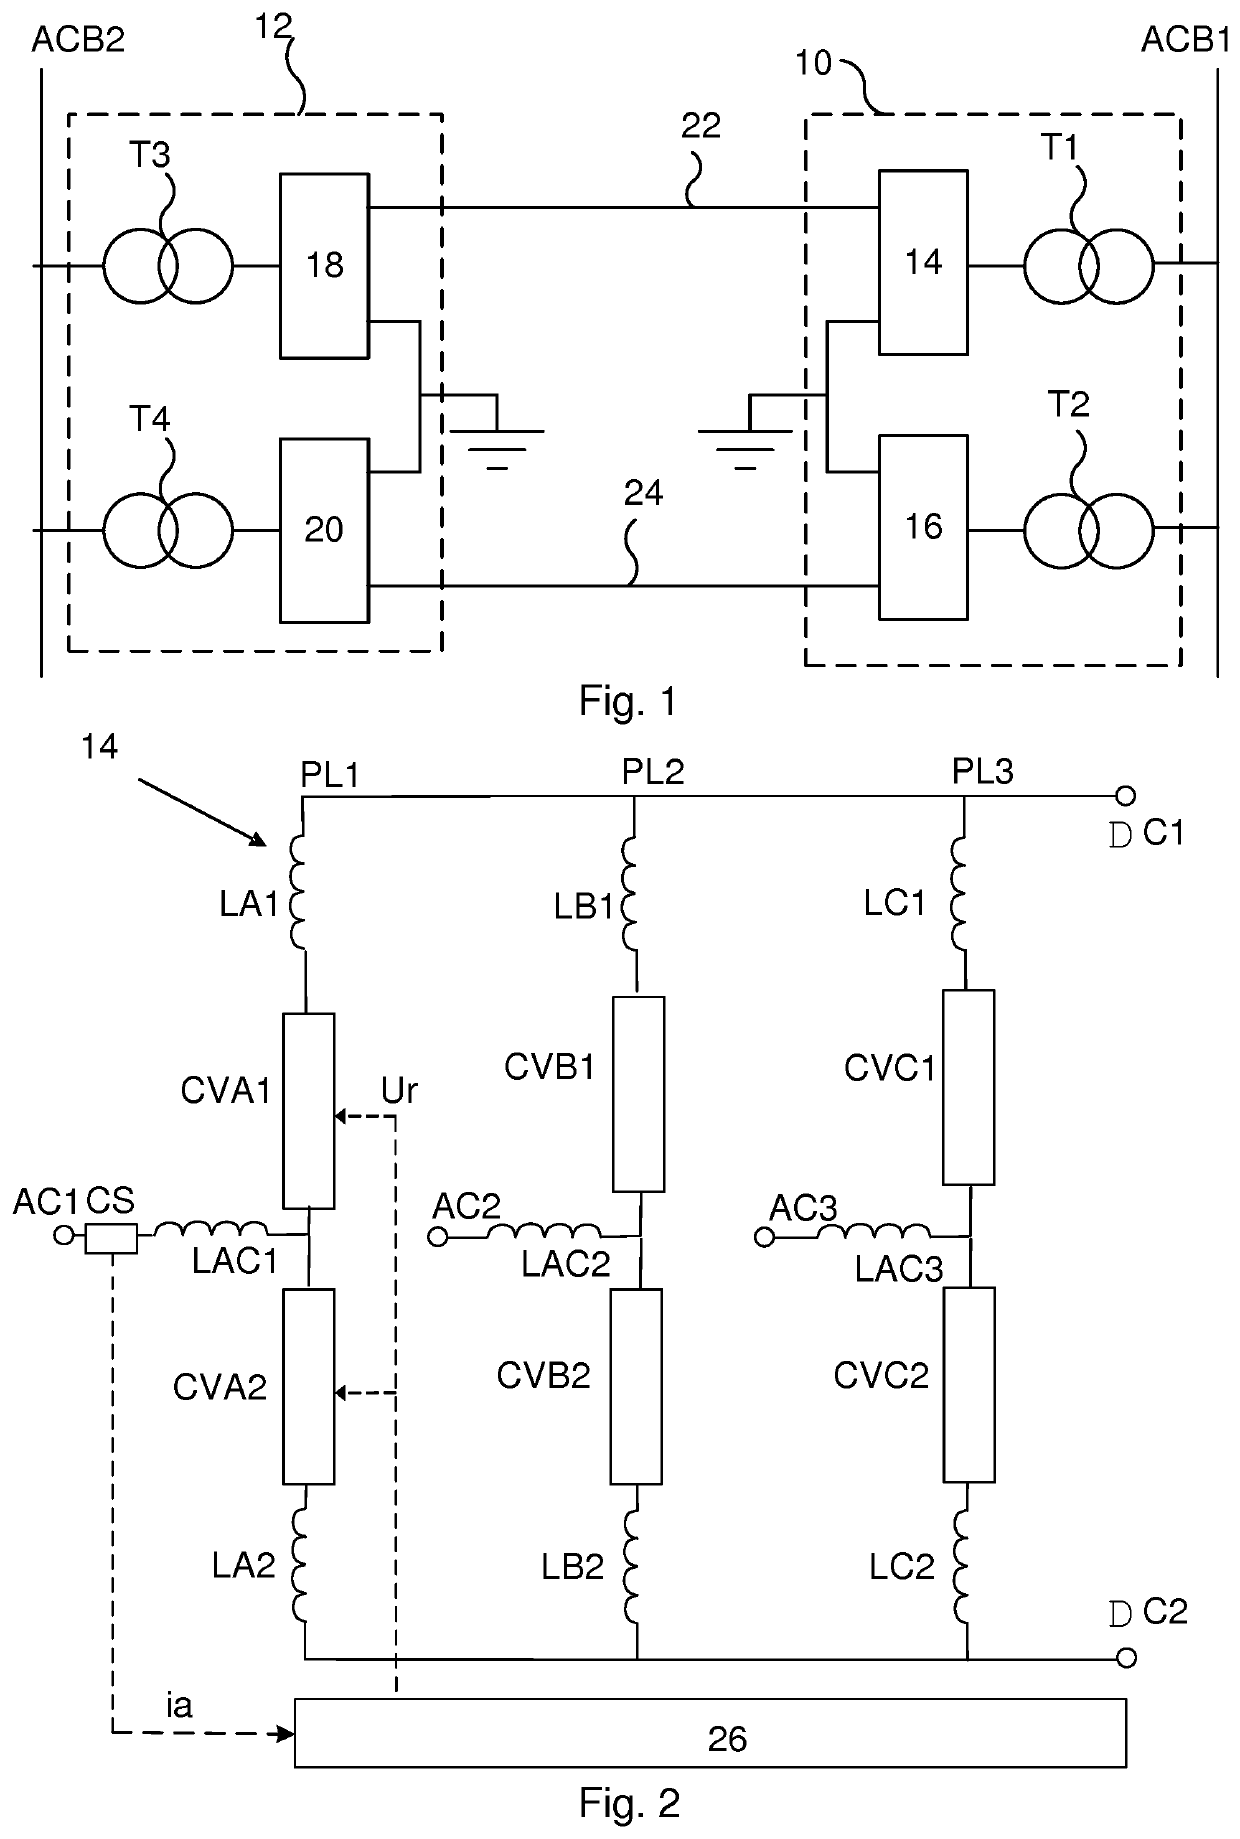 Controlling a voltage source converter in a DC system